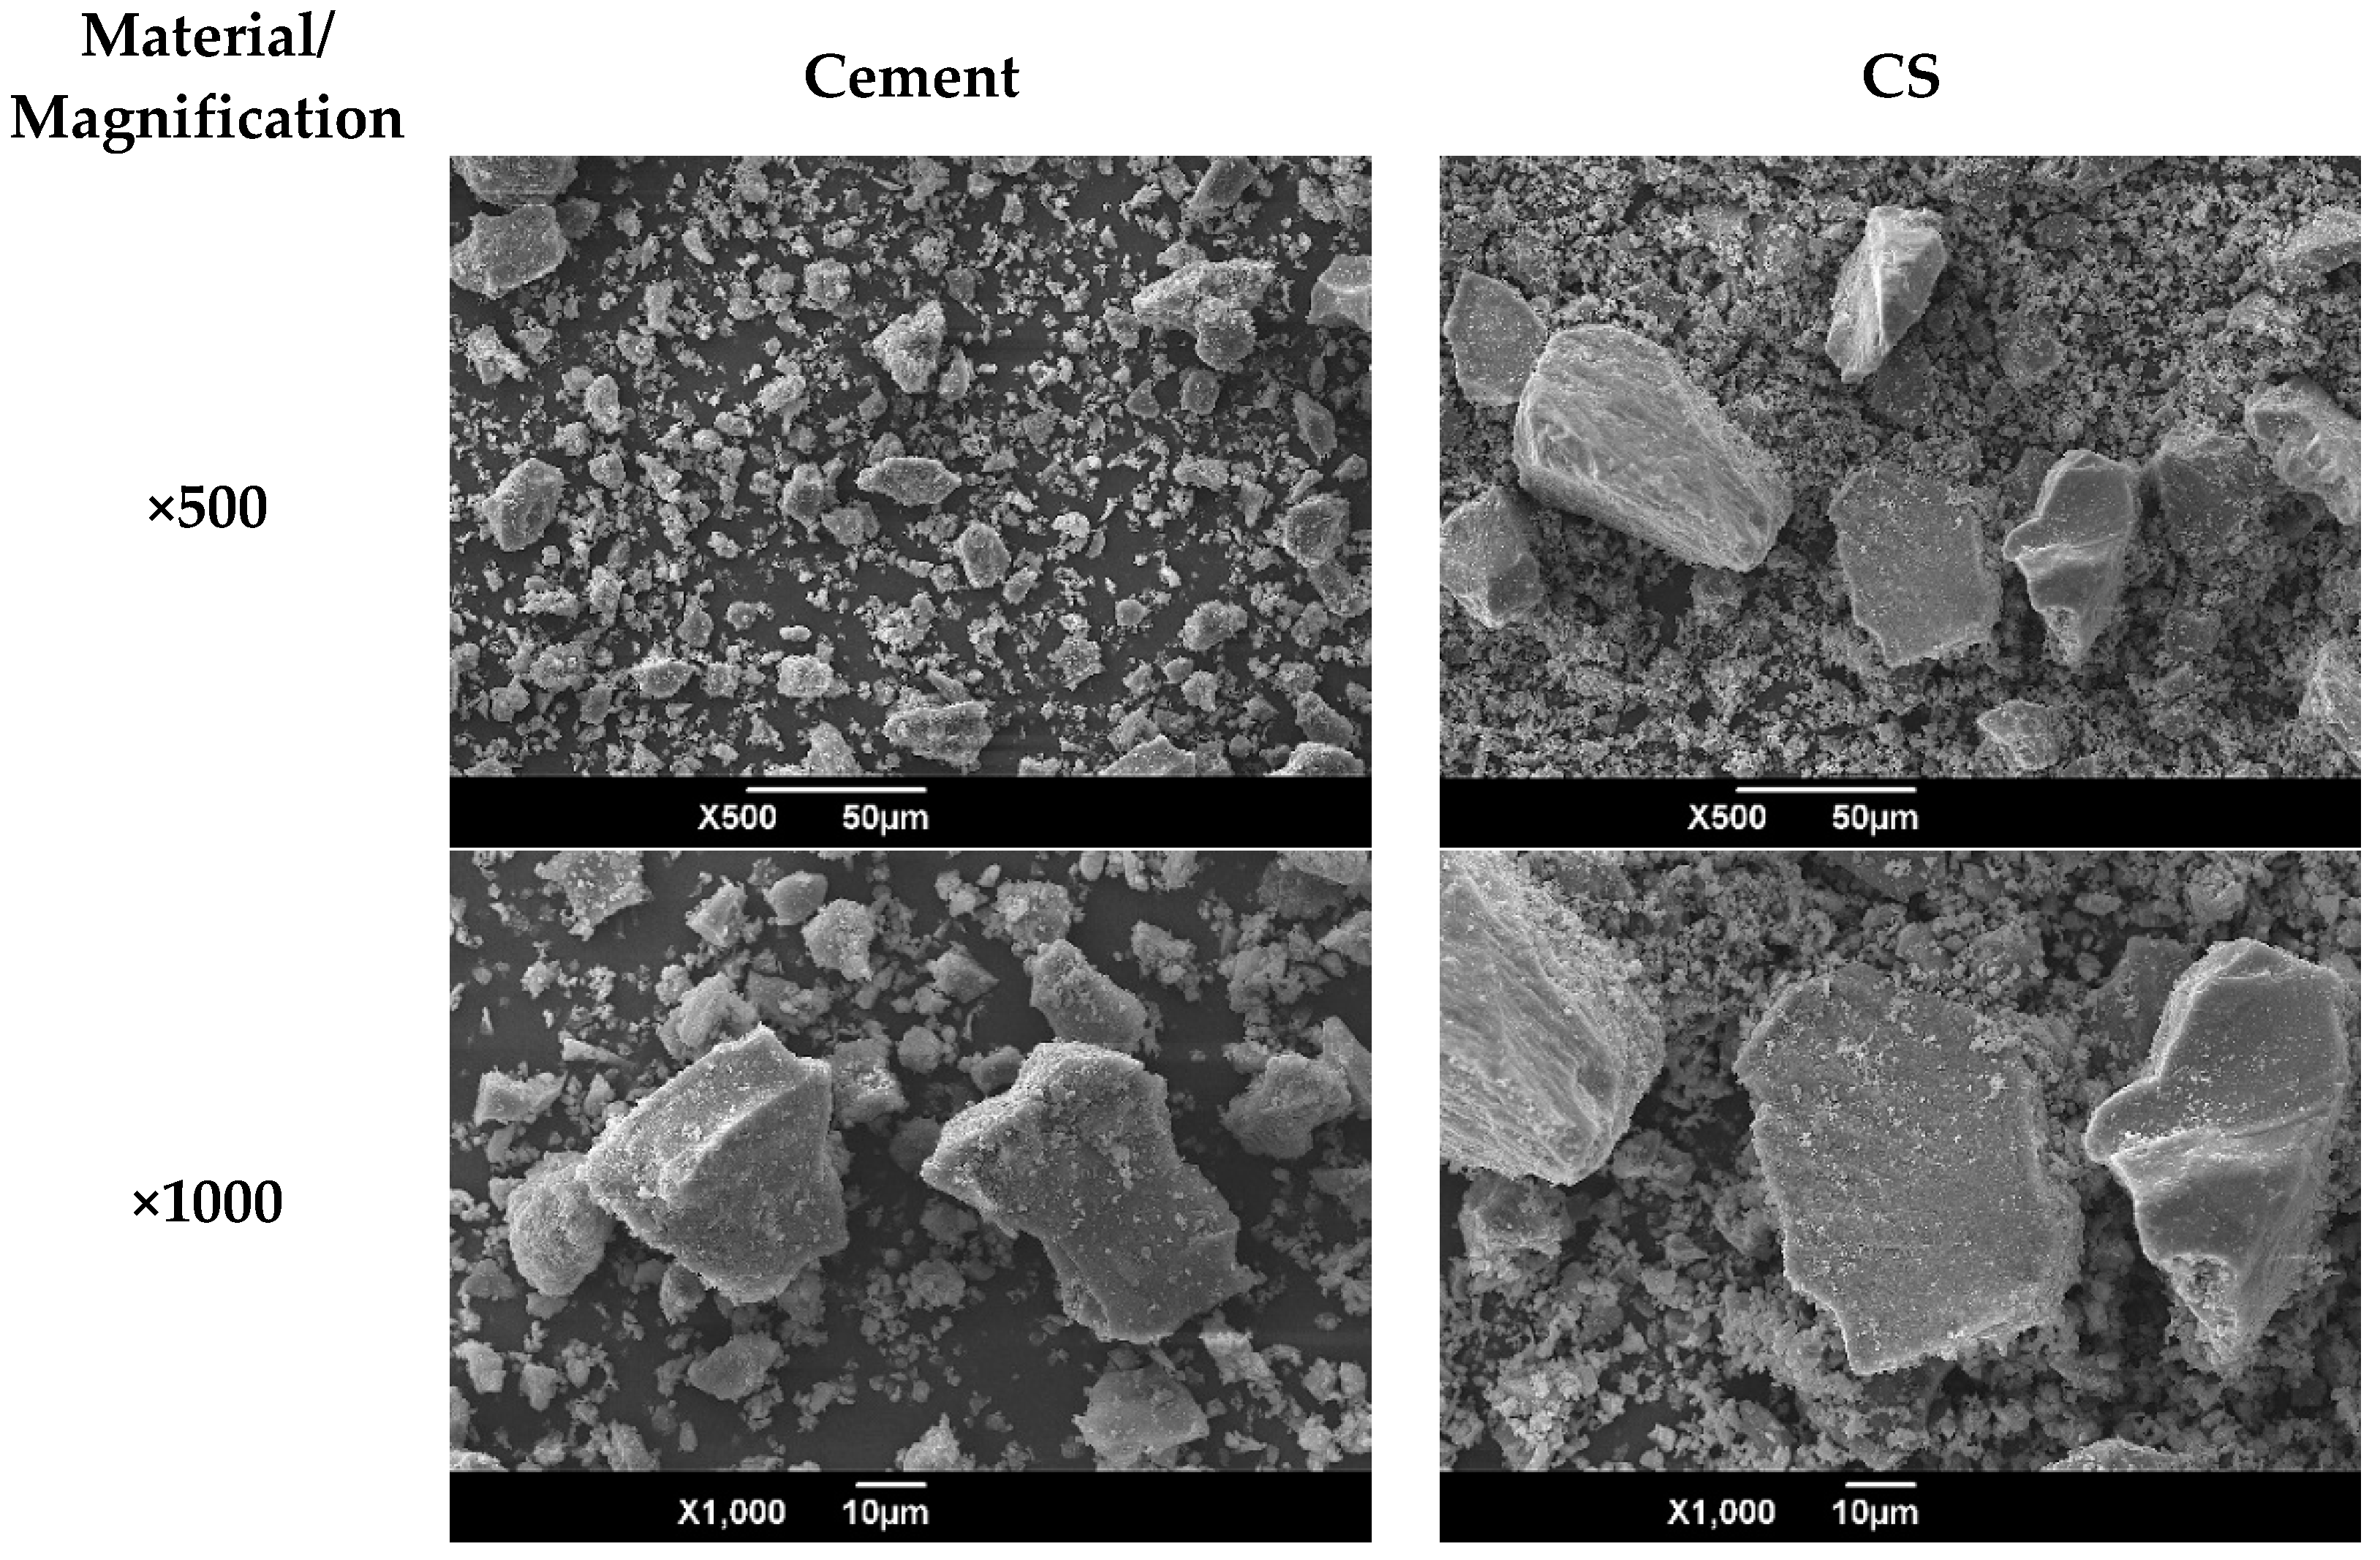 New composite binder cements place in concrete - Materials Today